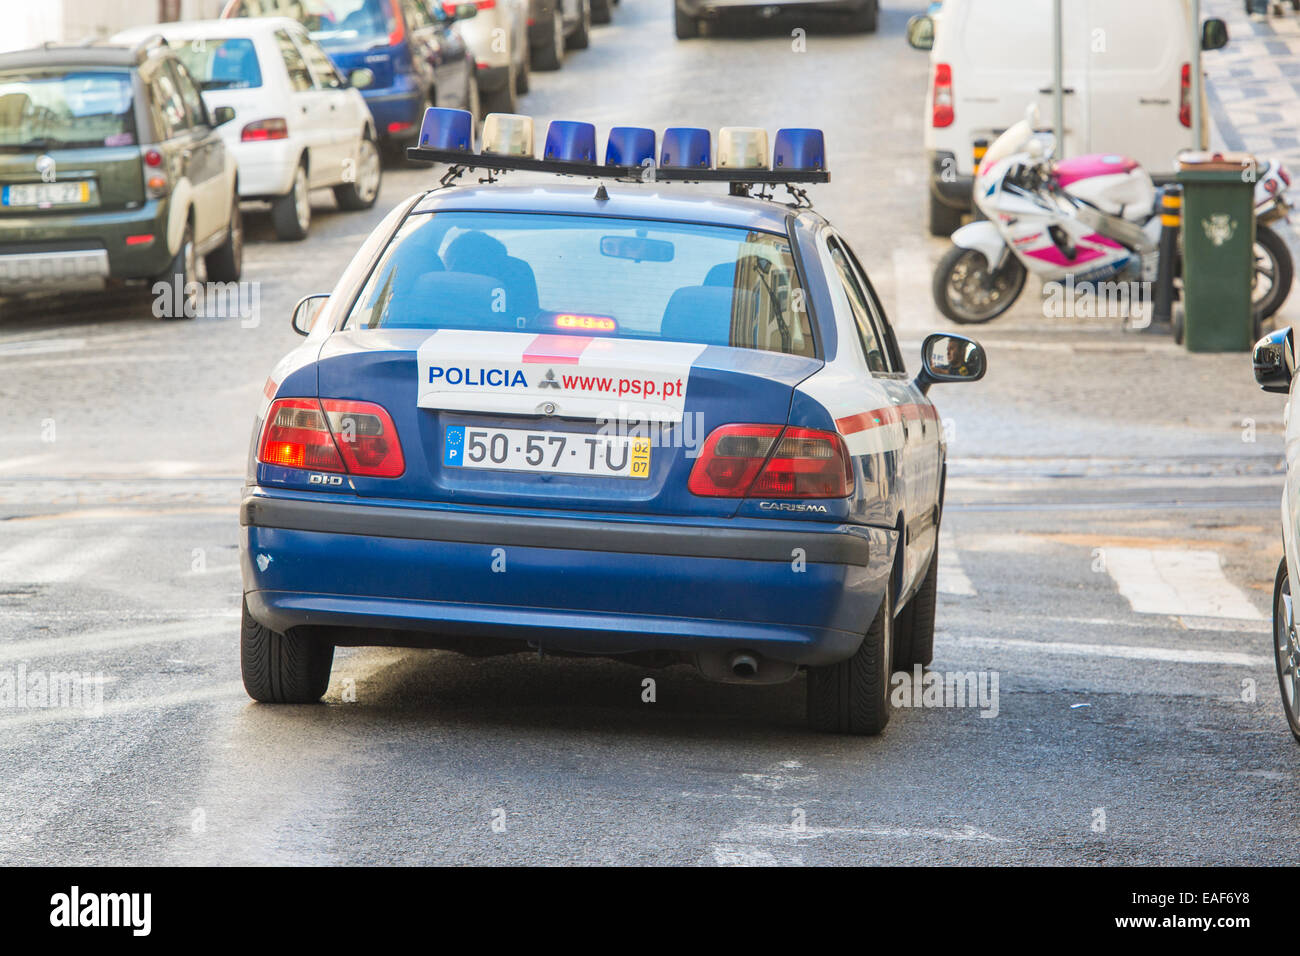 A police car in Lisbon, Portugal Stock Photo